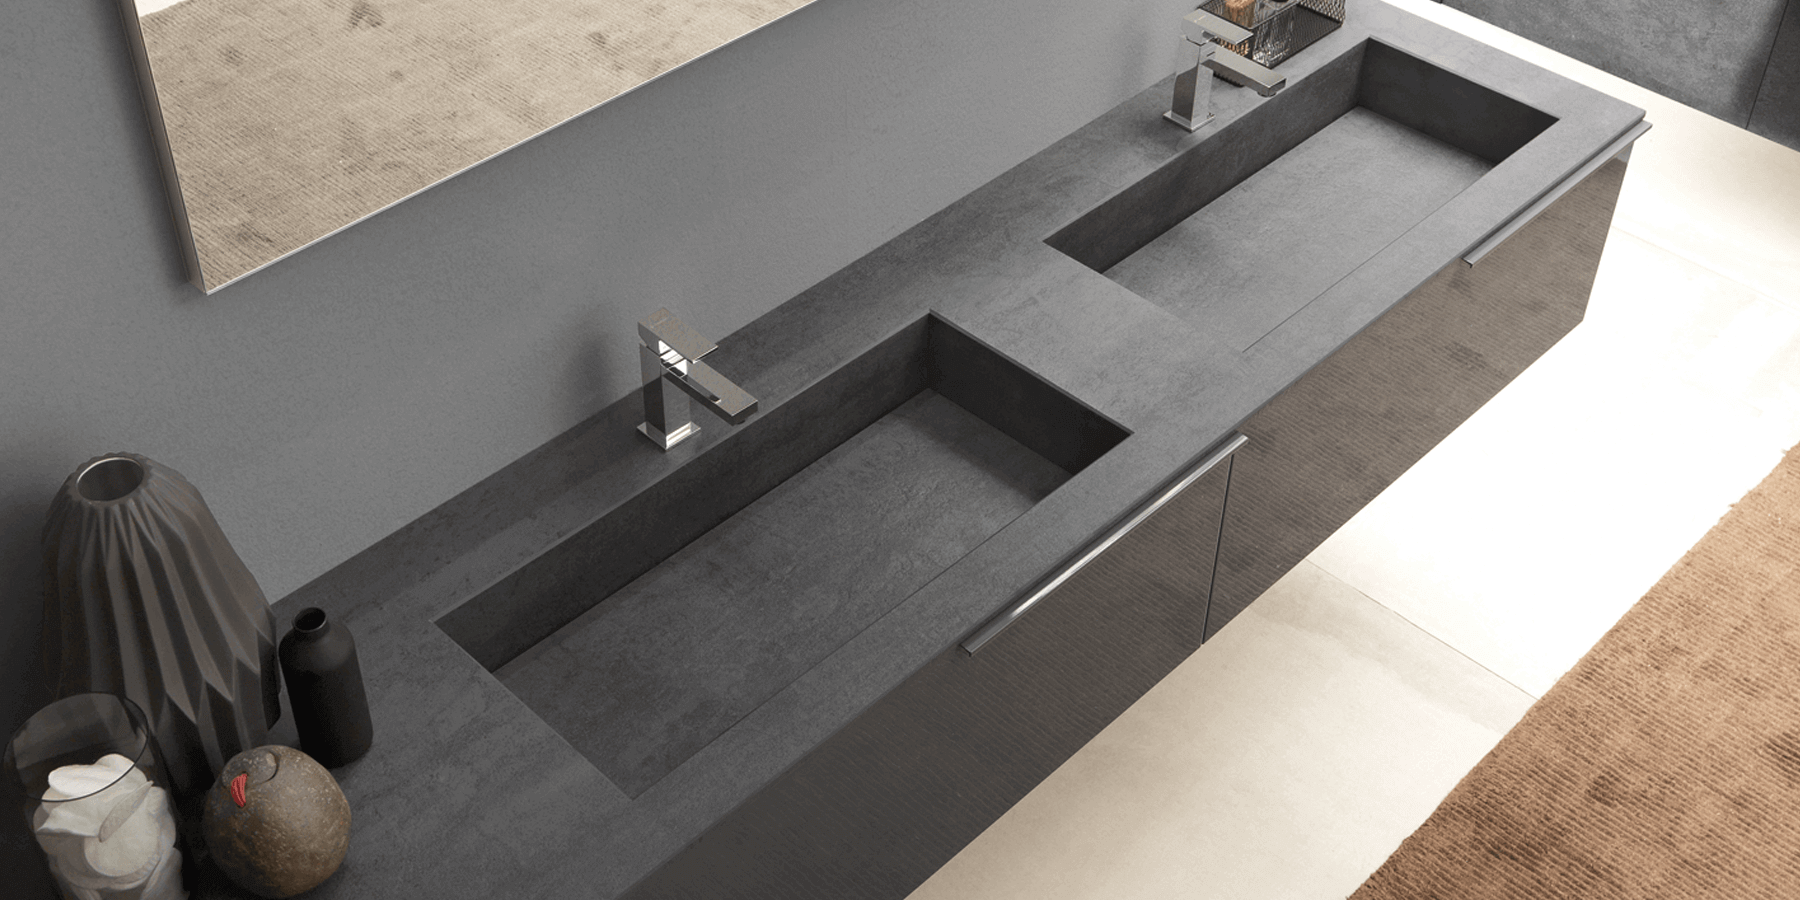 A slate-look porcelain countertop with two integrated basins